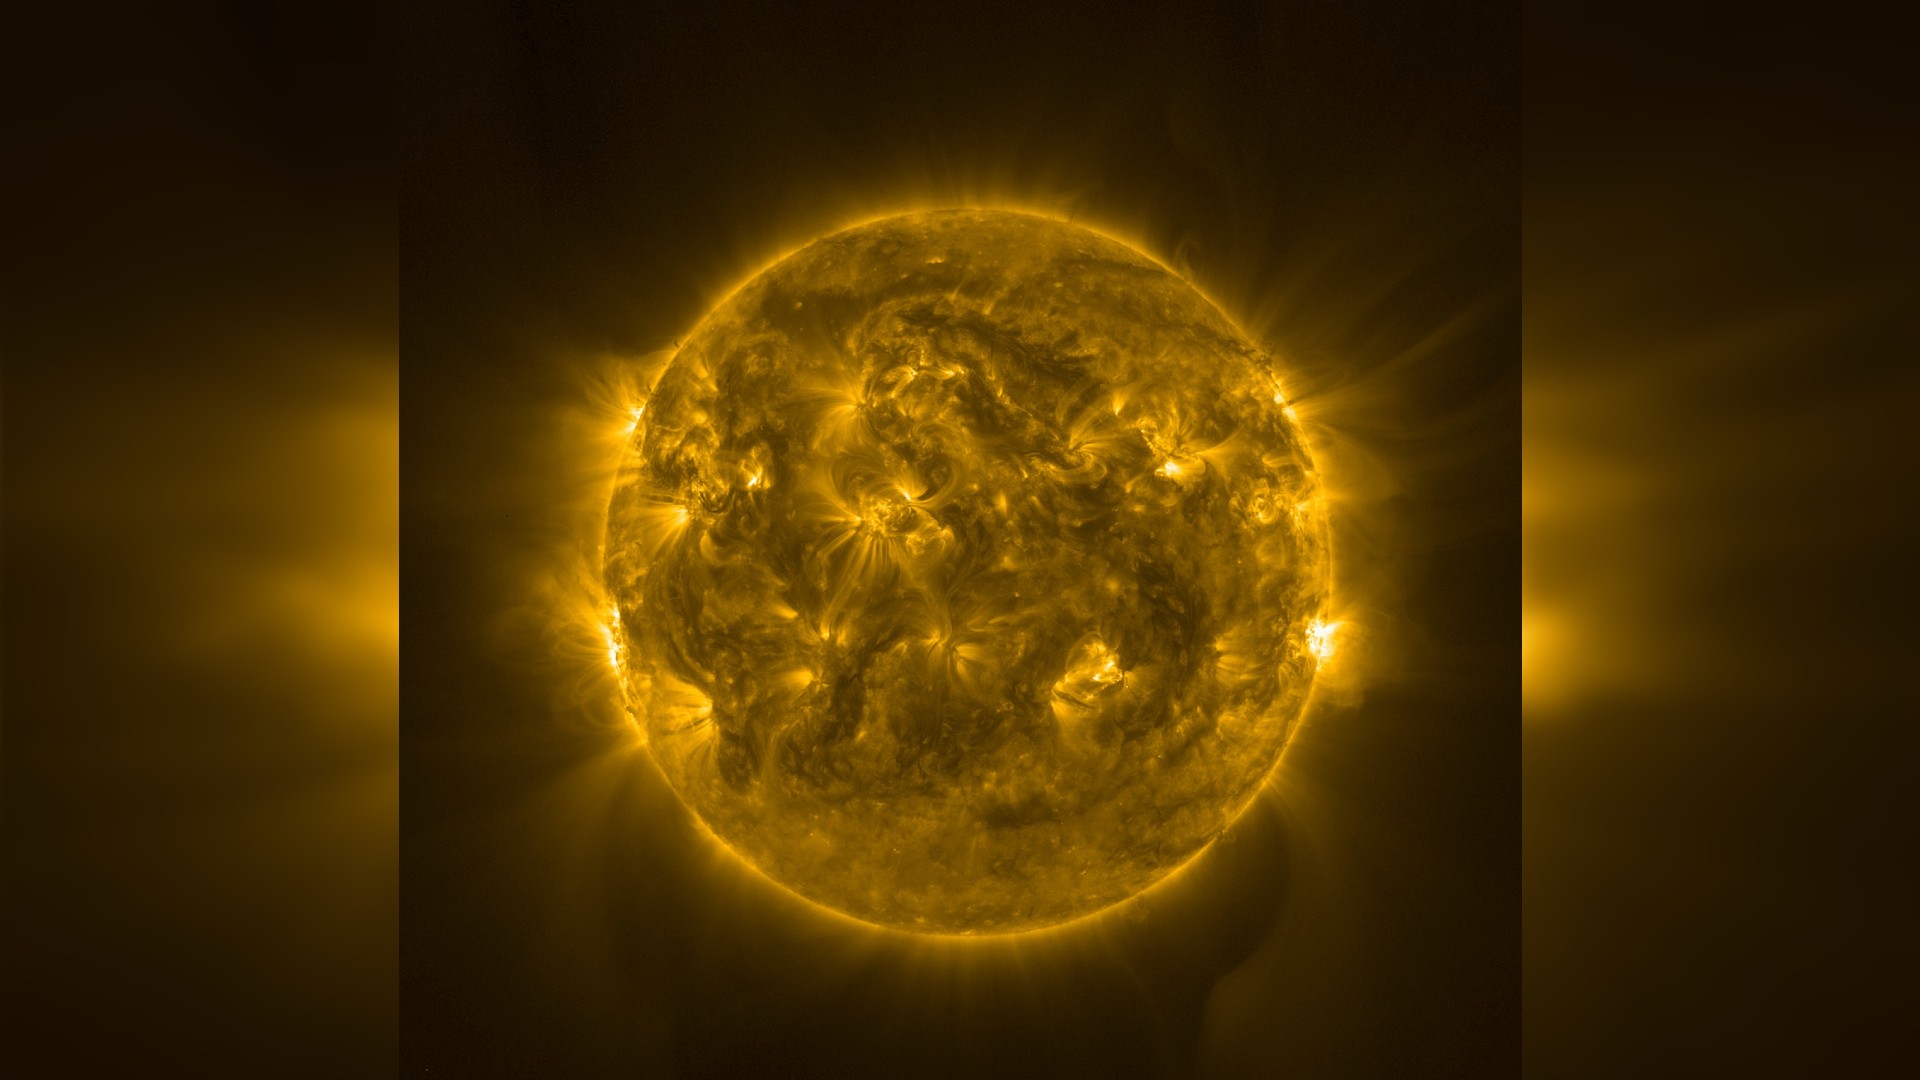 See the sun’s surface rage as solar maximum approaches (photo) Space